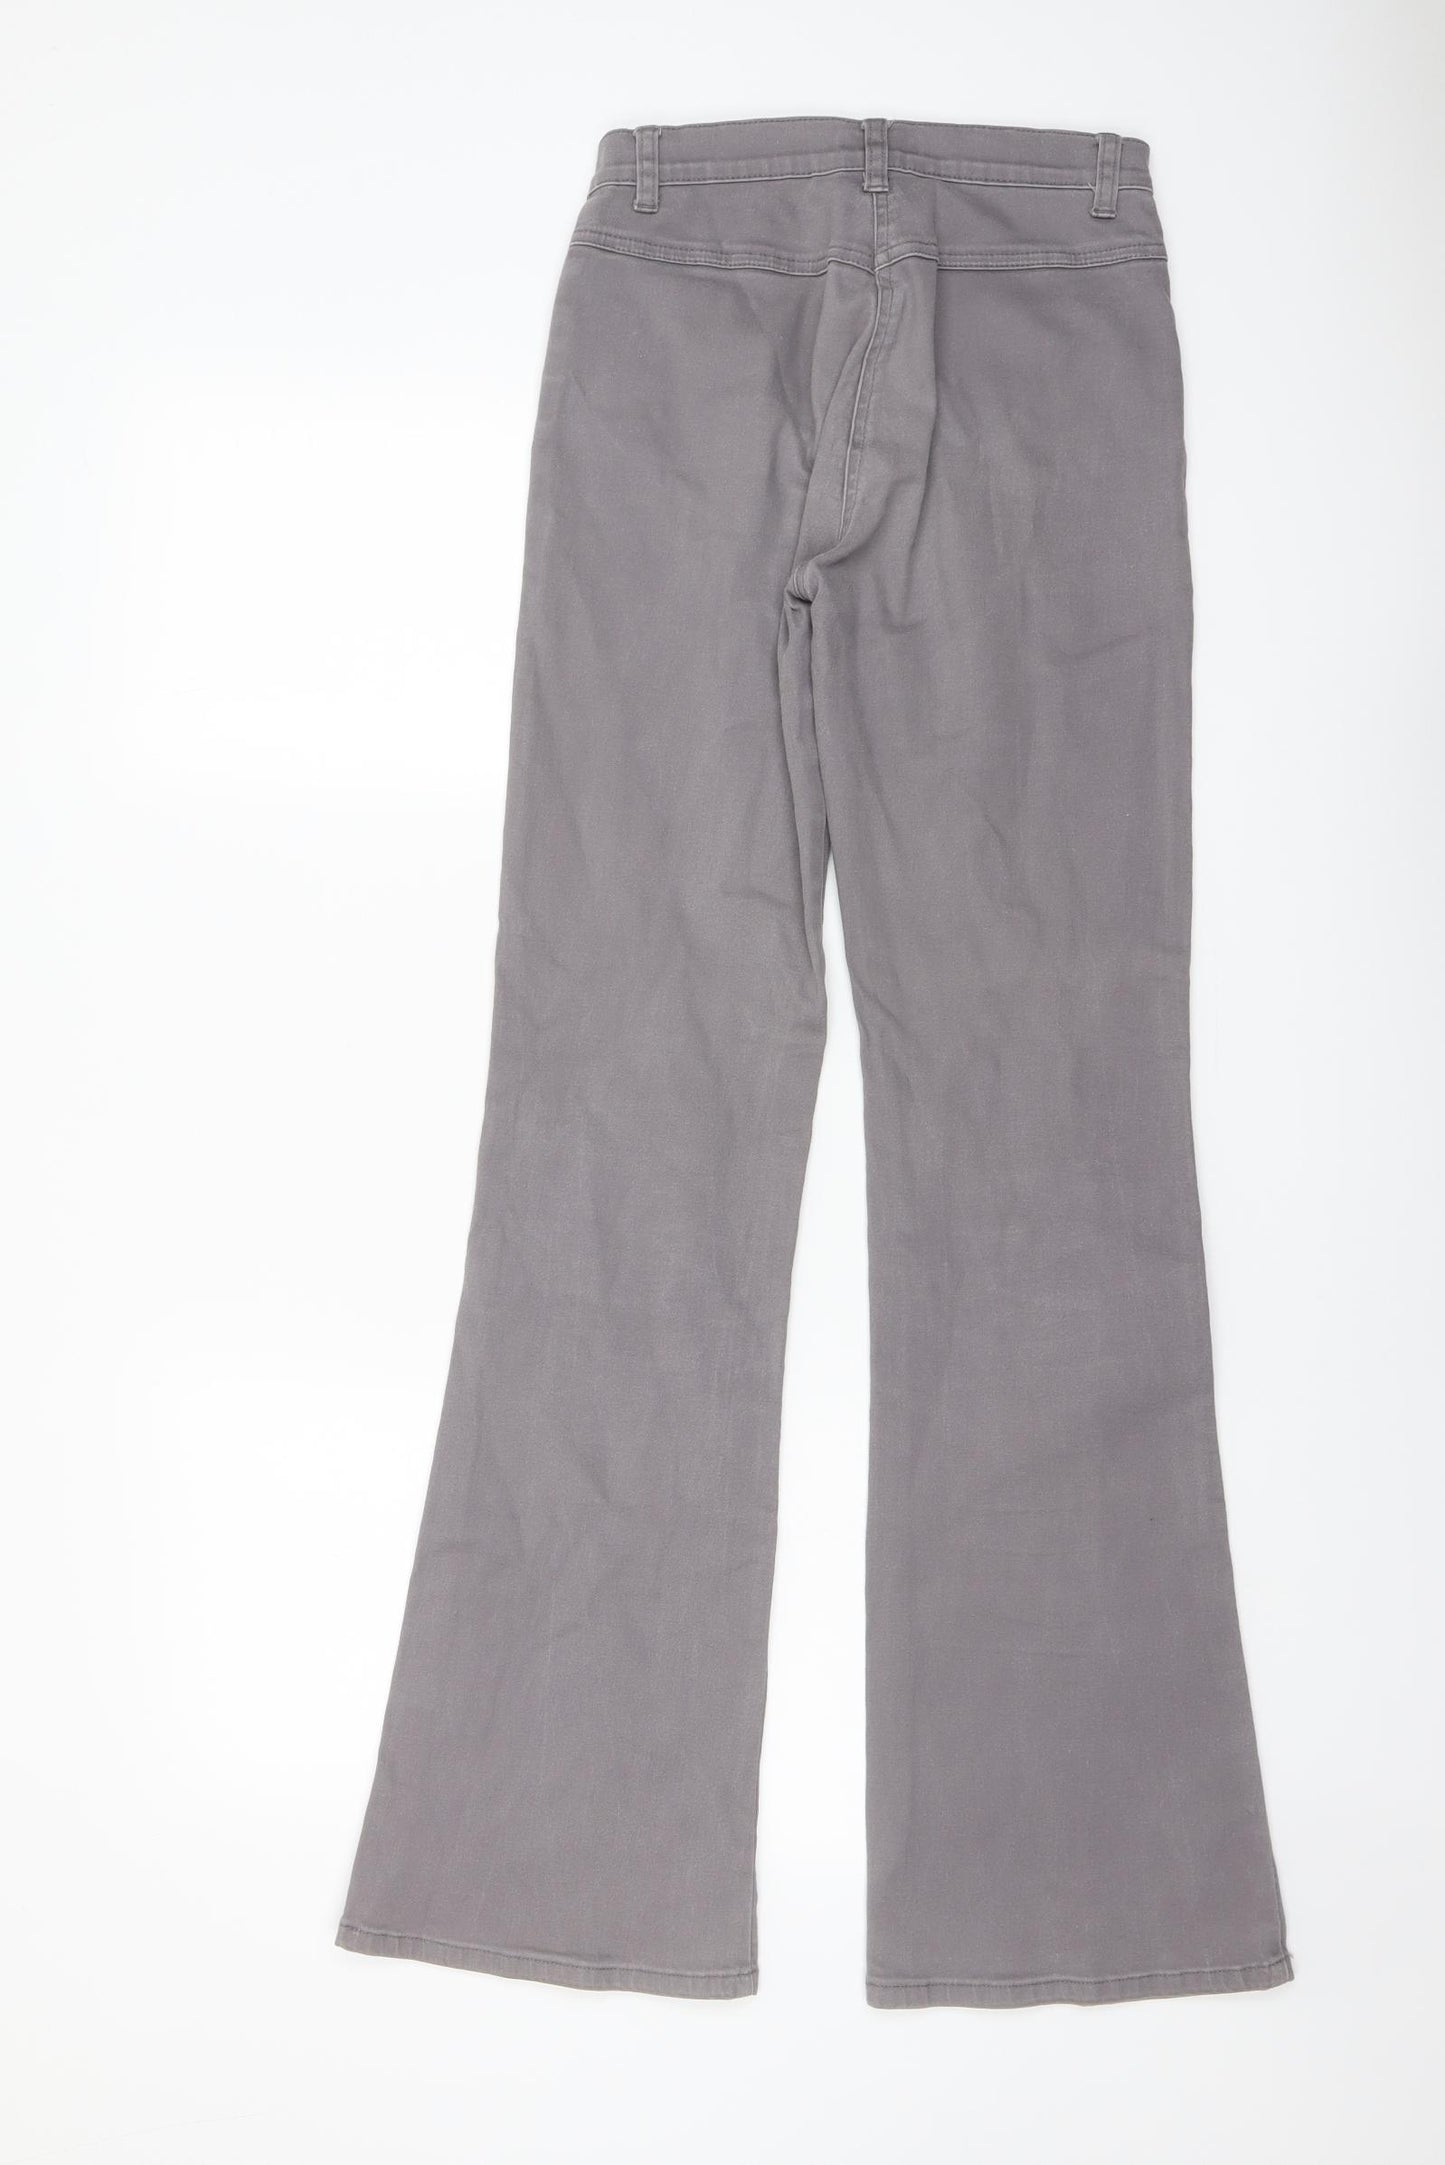 Miss Selfridge Womens Grey Cotton Flared Jeans Size 8 L32 in Regular Button